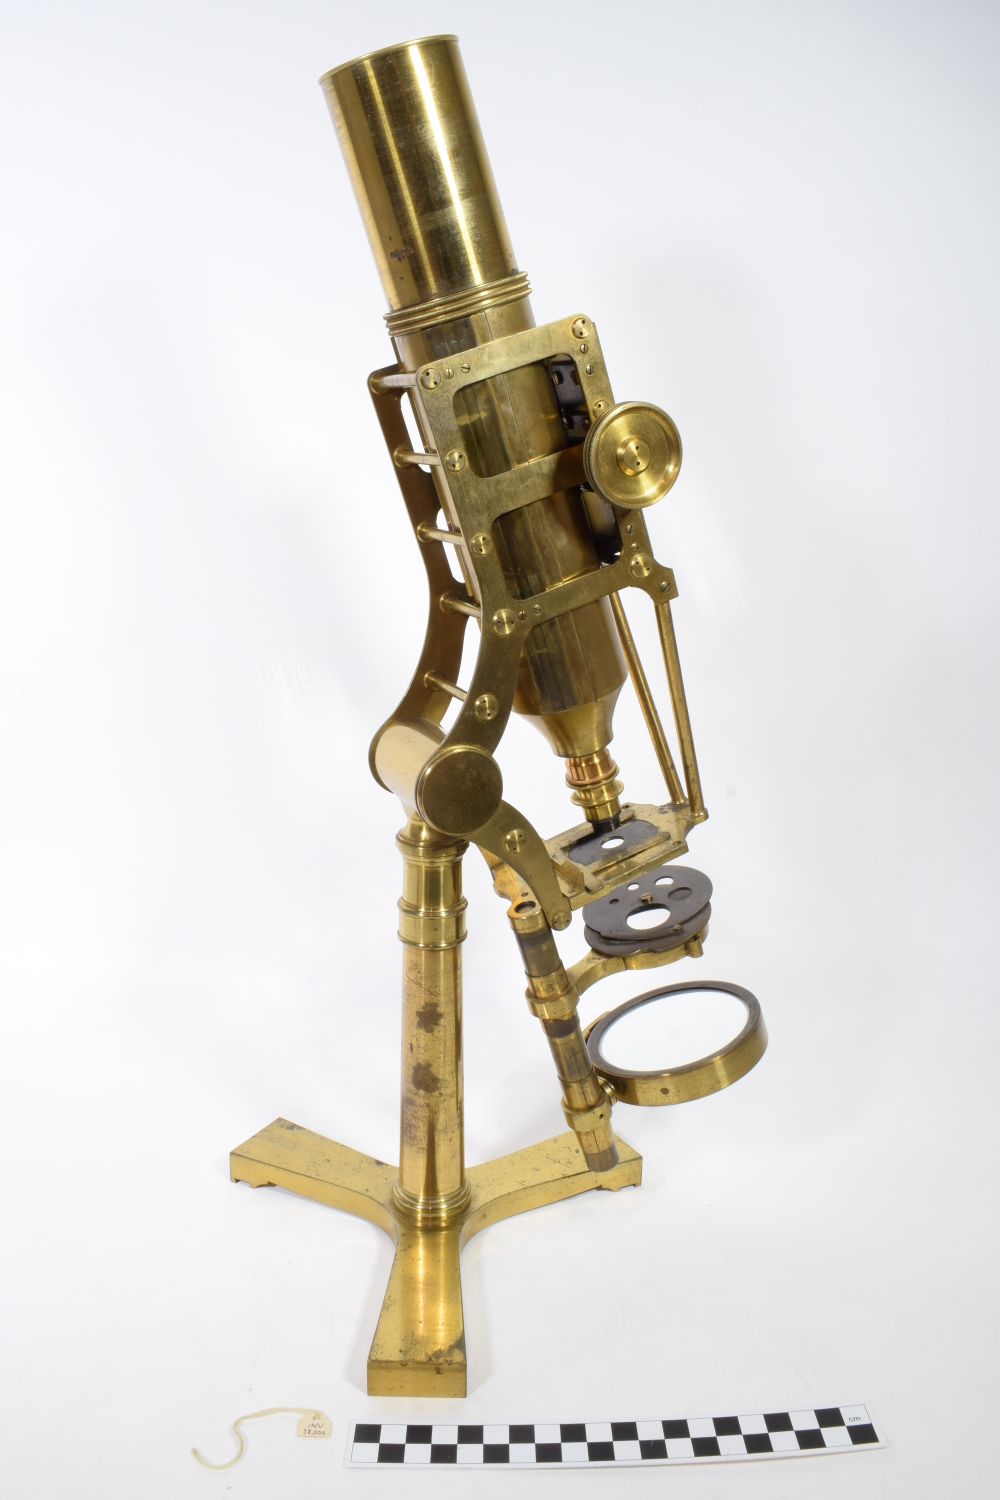 preview image for Compound Microscope, Attributed to Hugh Powell, London, c. 1835